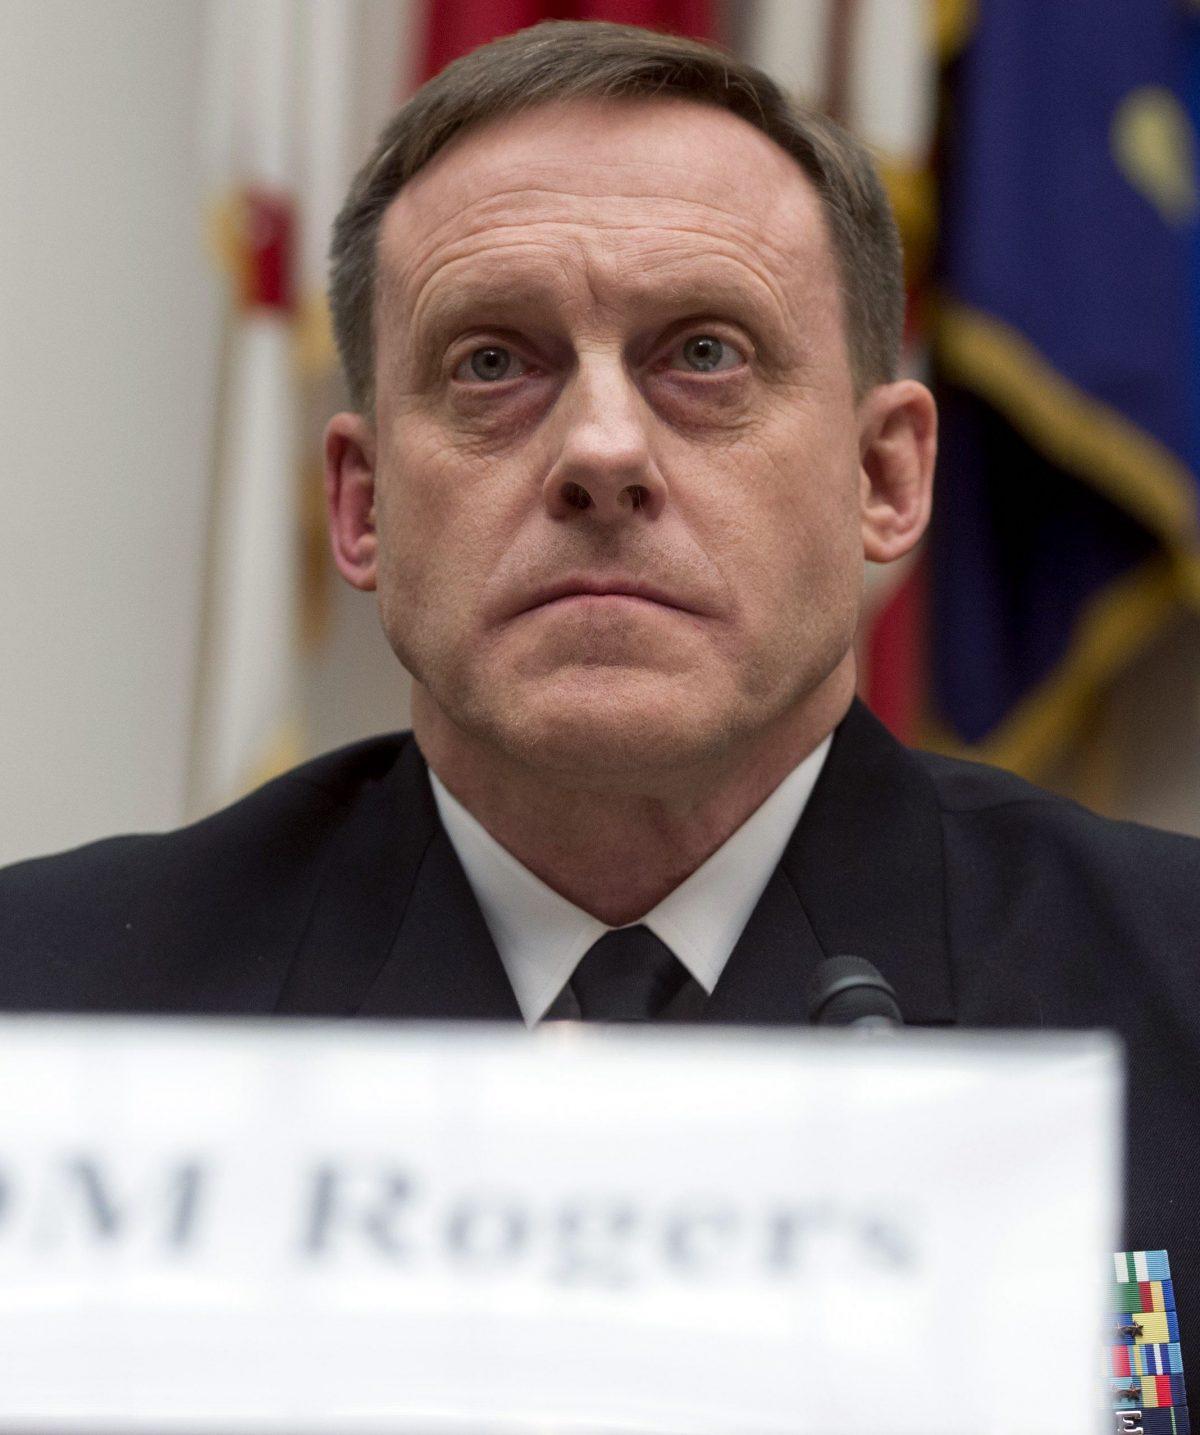 Director of the National Security Agency Admiral Mike Rogers. (SAUL LOEB/AFP/Getty Images)